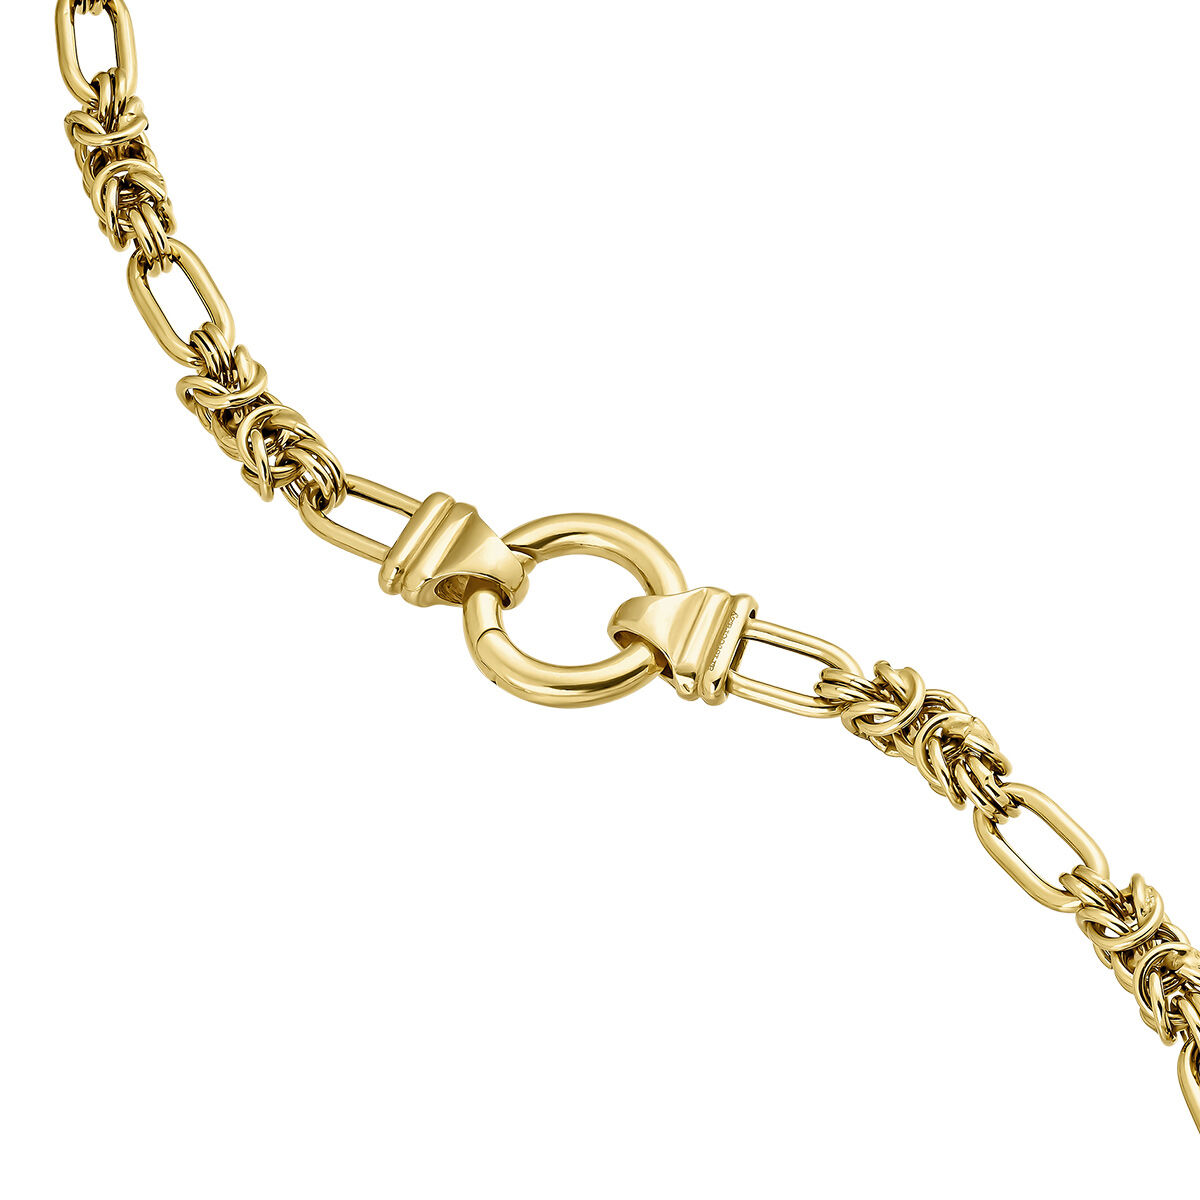 Mixed link chain in 18k yellow gold-plated silver, J05338-02-45, hi-res